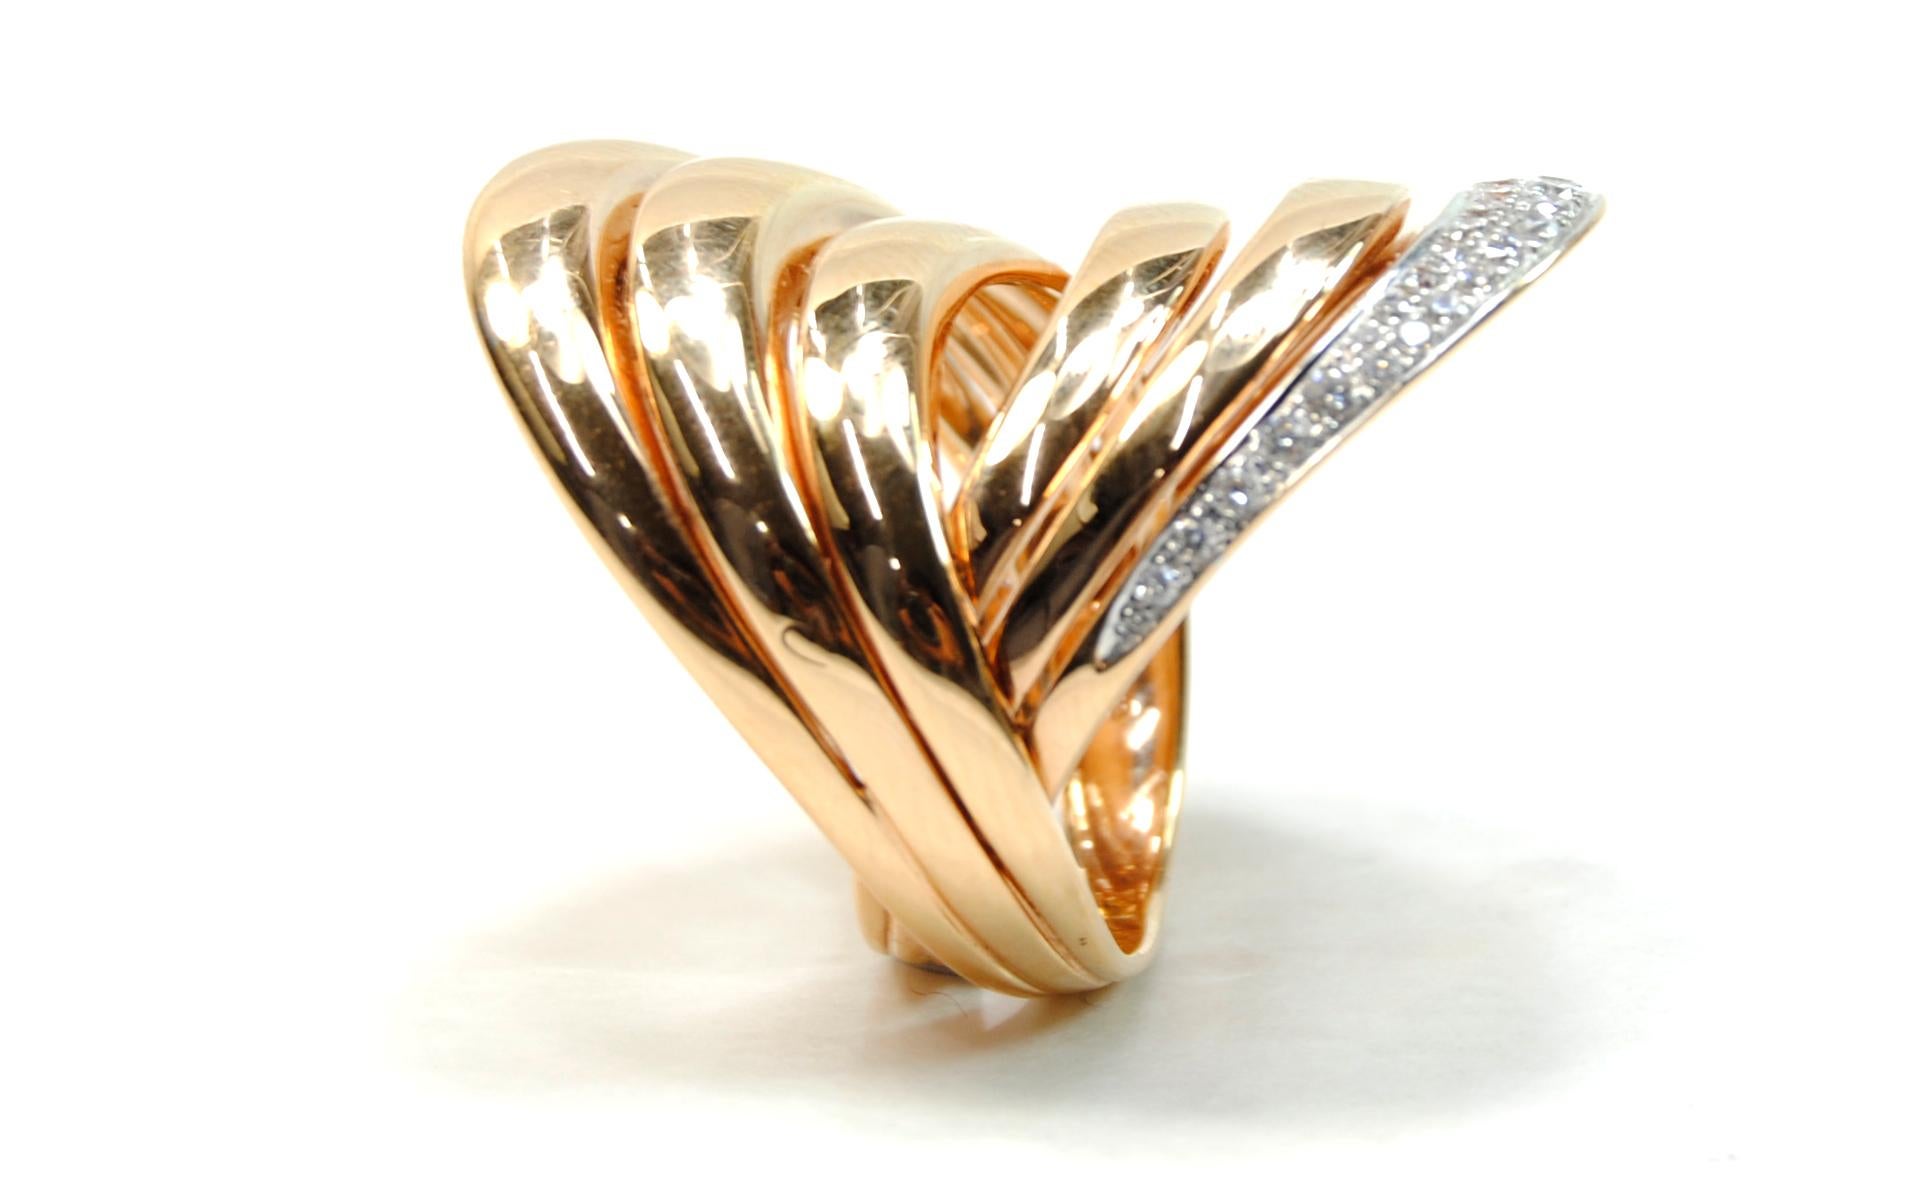 Contemporary Pink Gold Ring 16.90 GR and 40 Carat Diamonds